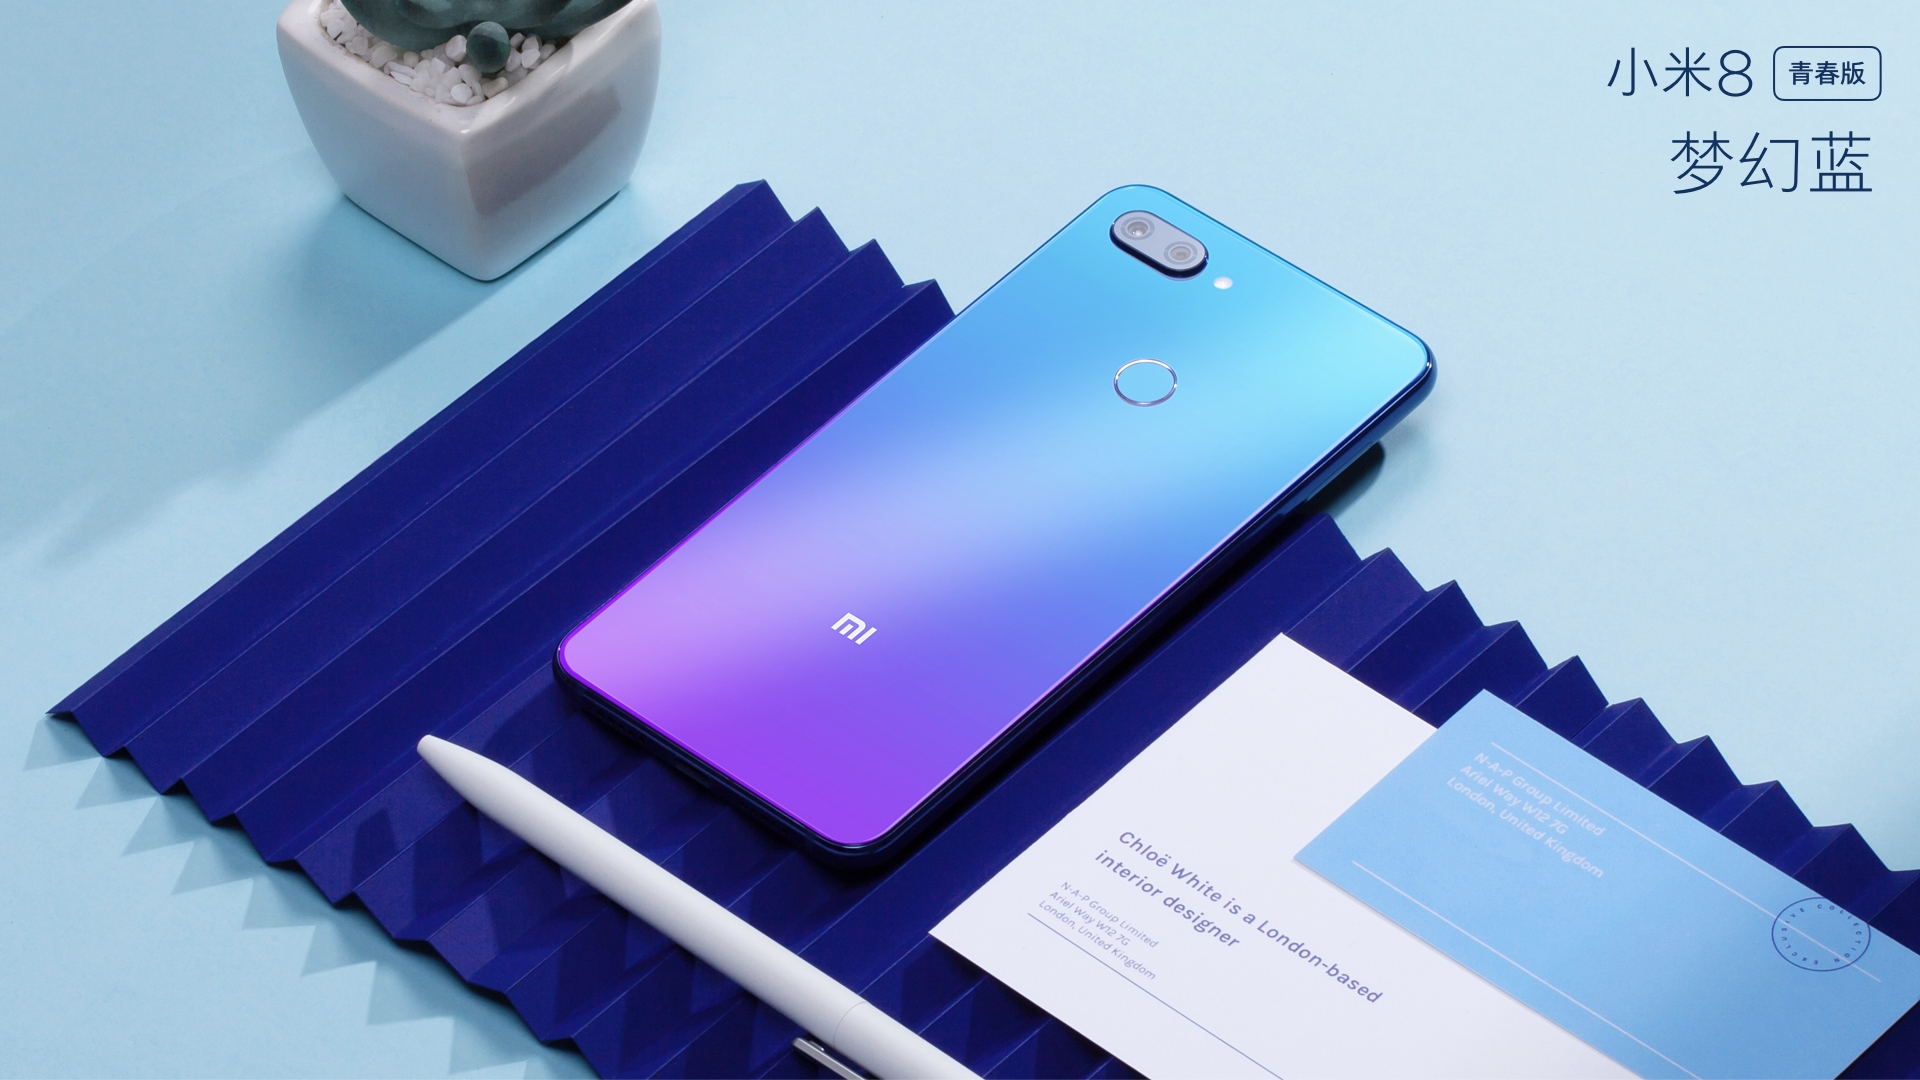 The Xiaomi Mi 8 Youth Edition in blue.